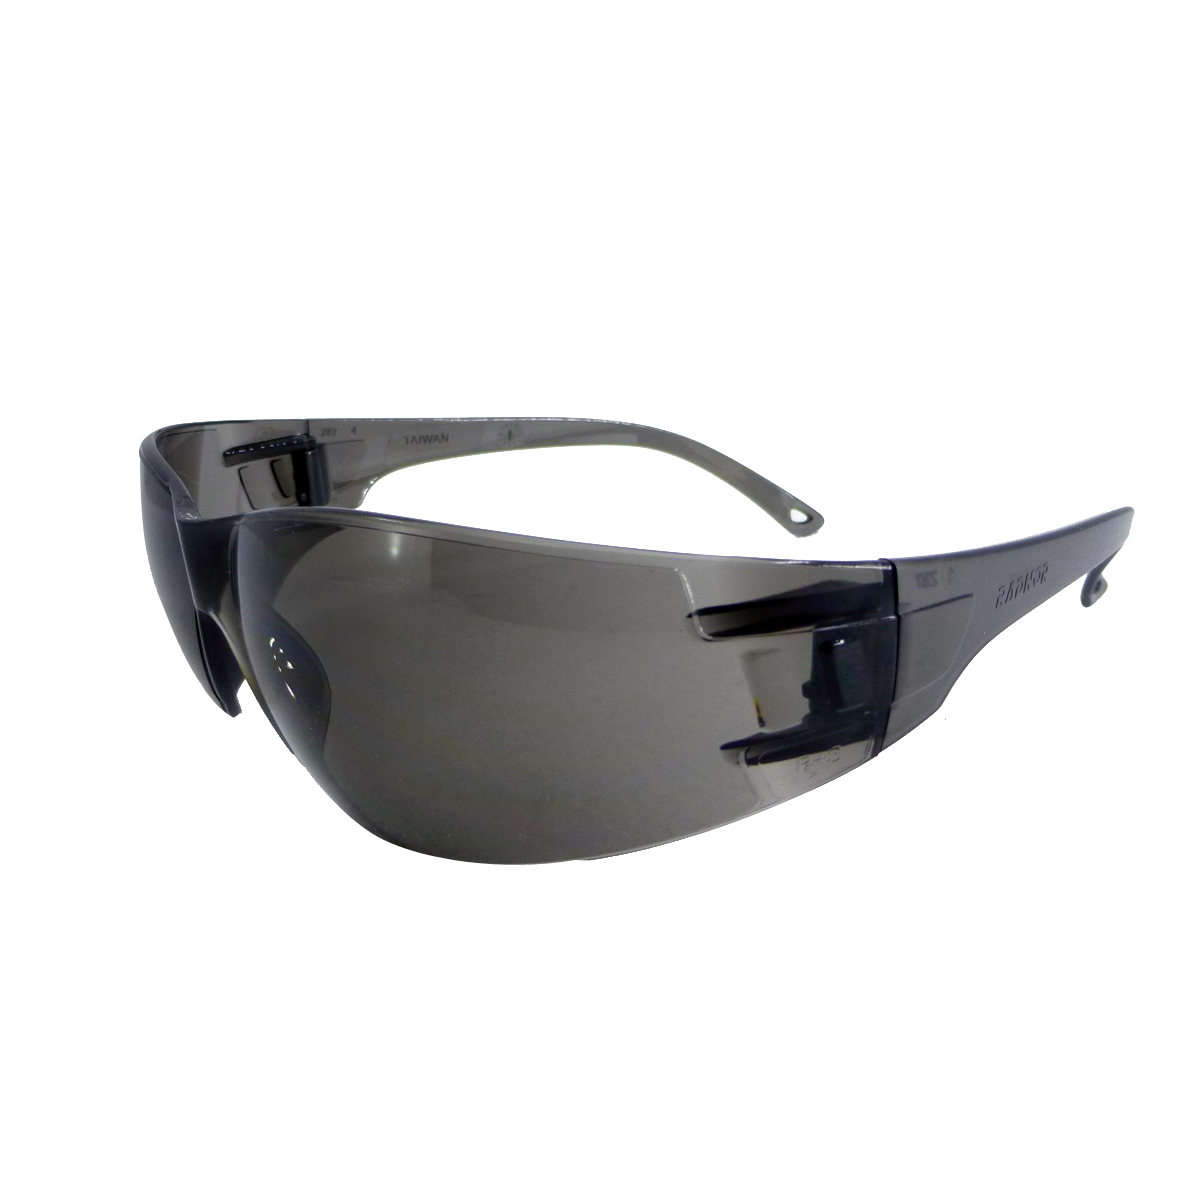 Galeton 11009 Crest Safety Glasses with Flexible Temples and Anti-Scratch Lenses Gray 